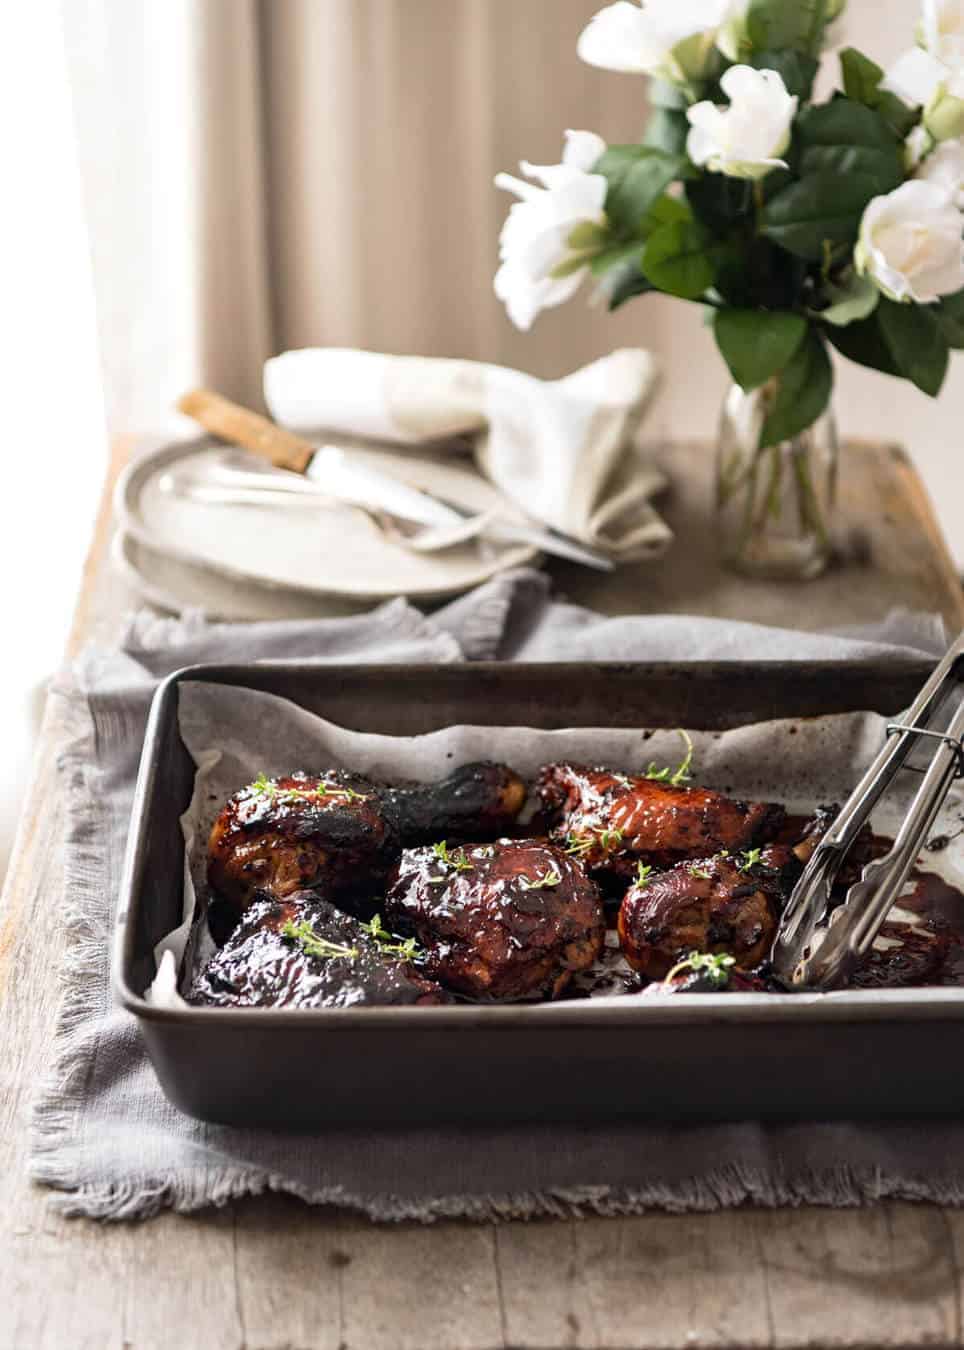 Balsamic vinegar, soy sauce, honey, sugar and garlic is all you need to make this super easy and fast Baked Balsamic Chicken! No marinating required. www.recipetineats.com